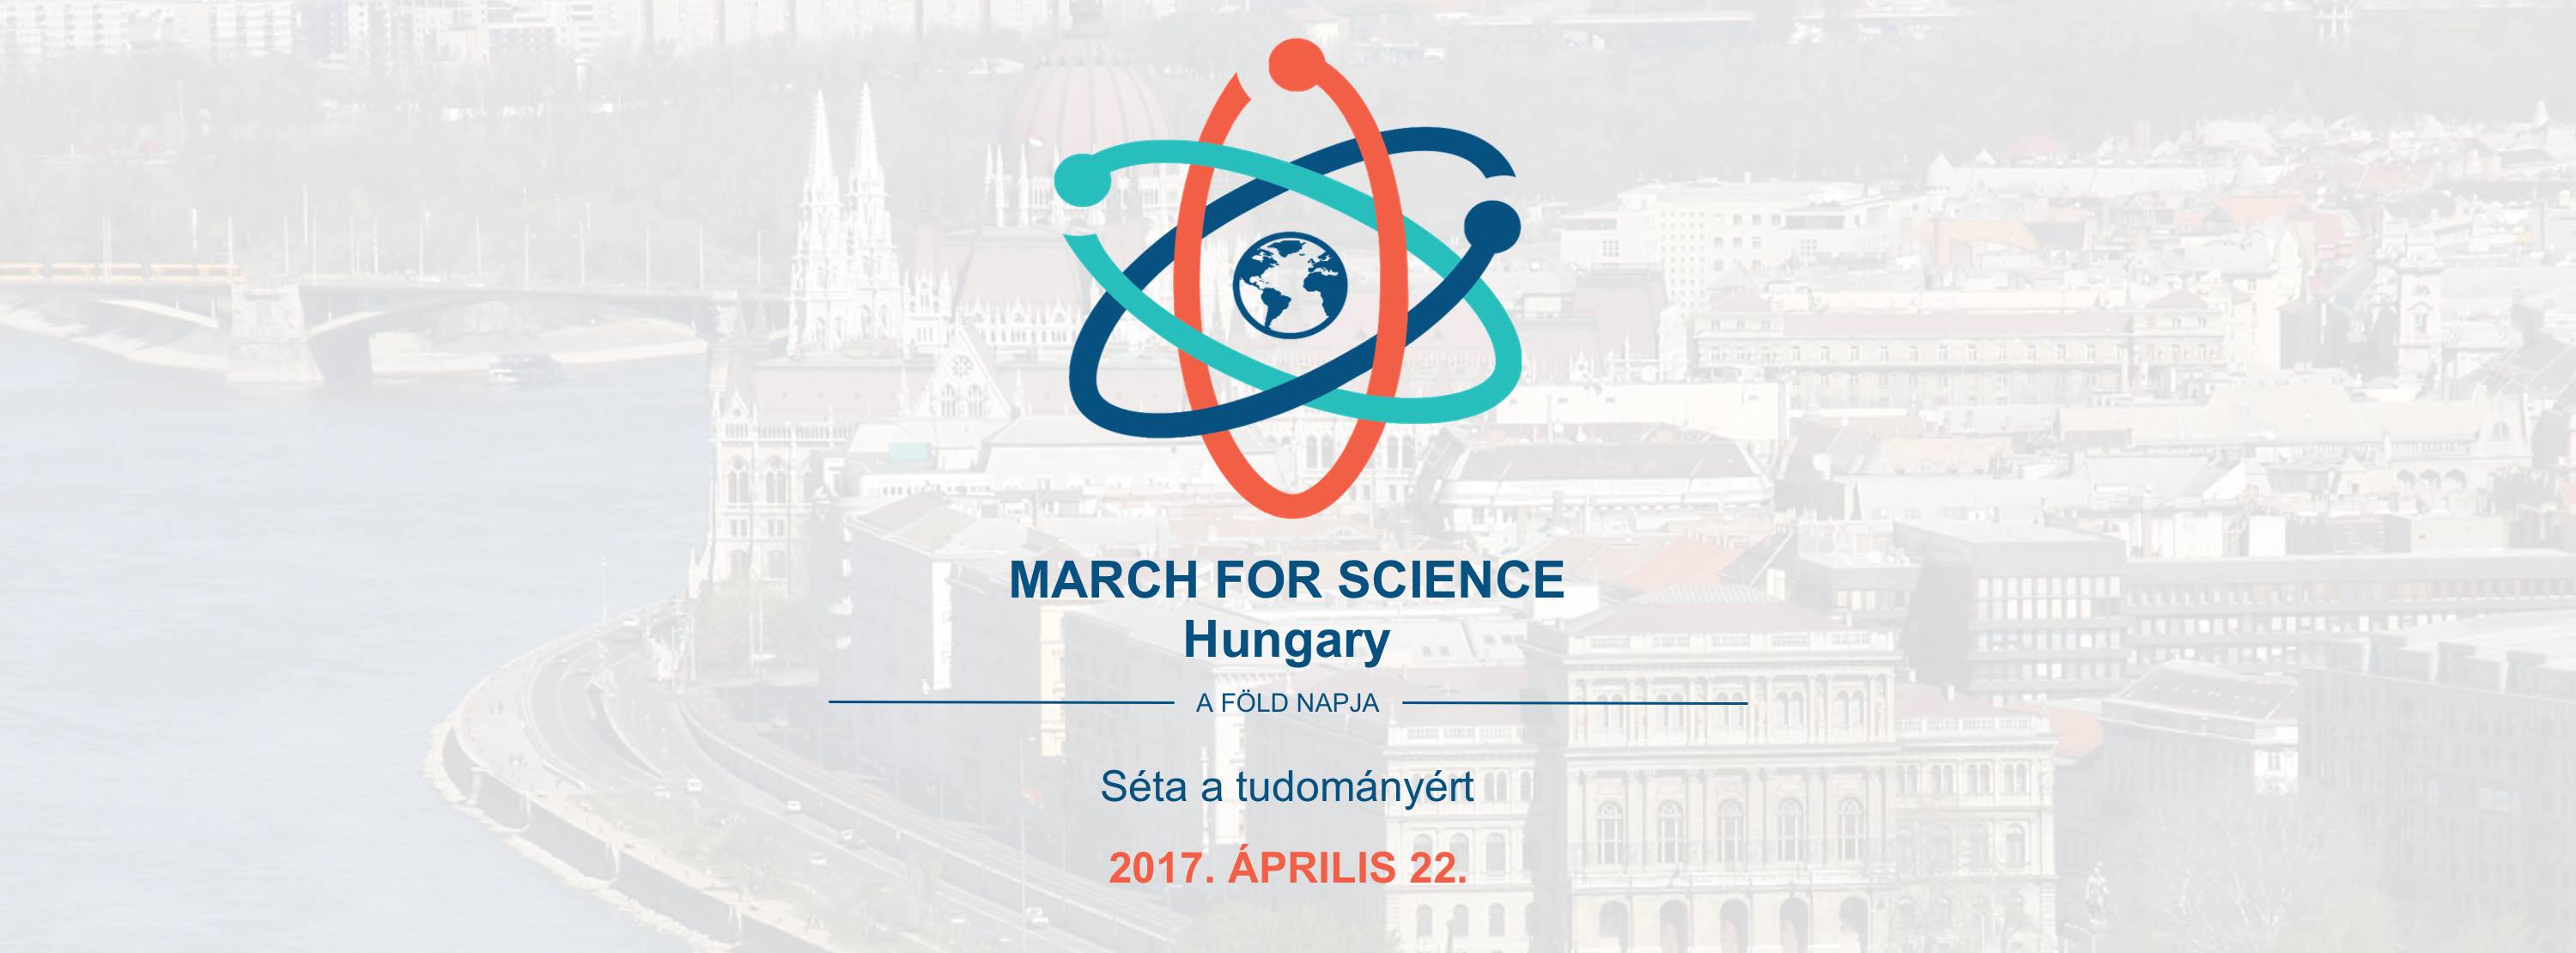 march_for_science_logo.jpg